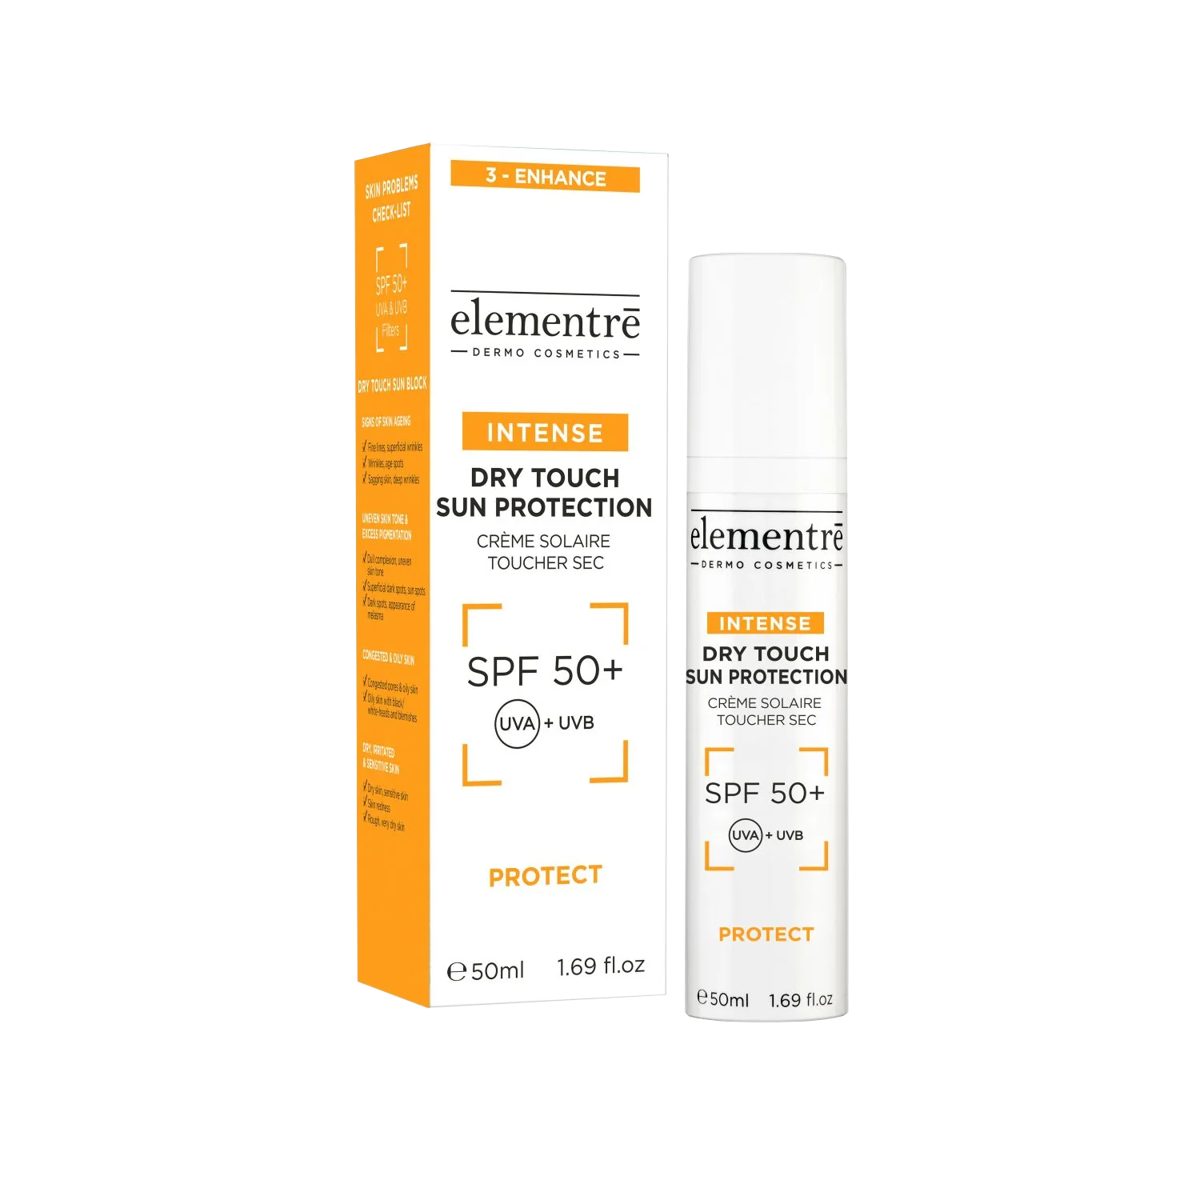 Elementre SPF 50+ Dry Touch Intense Sun Protection